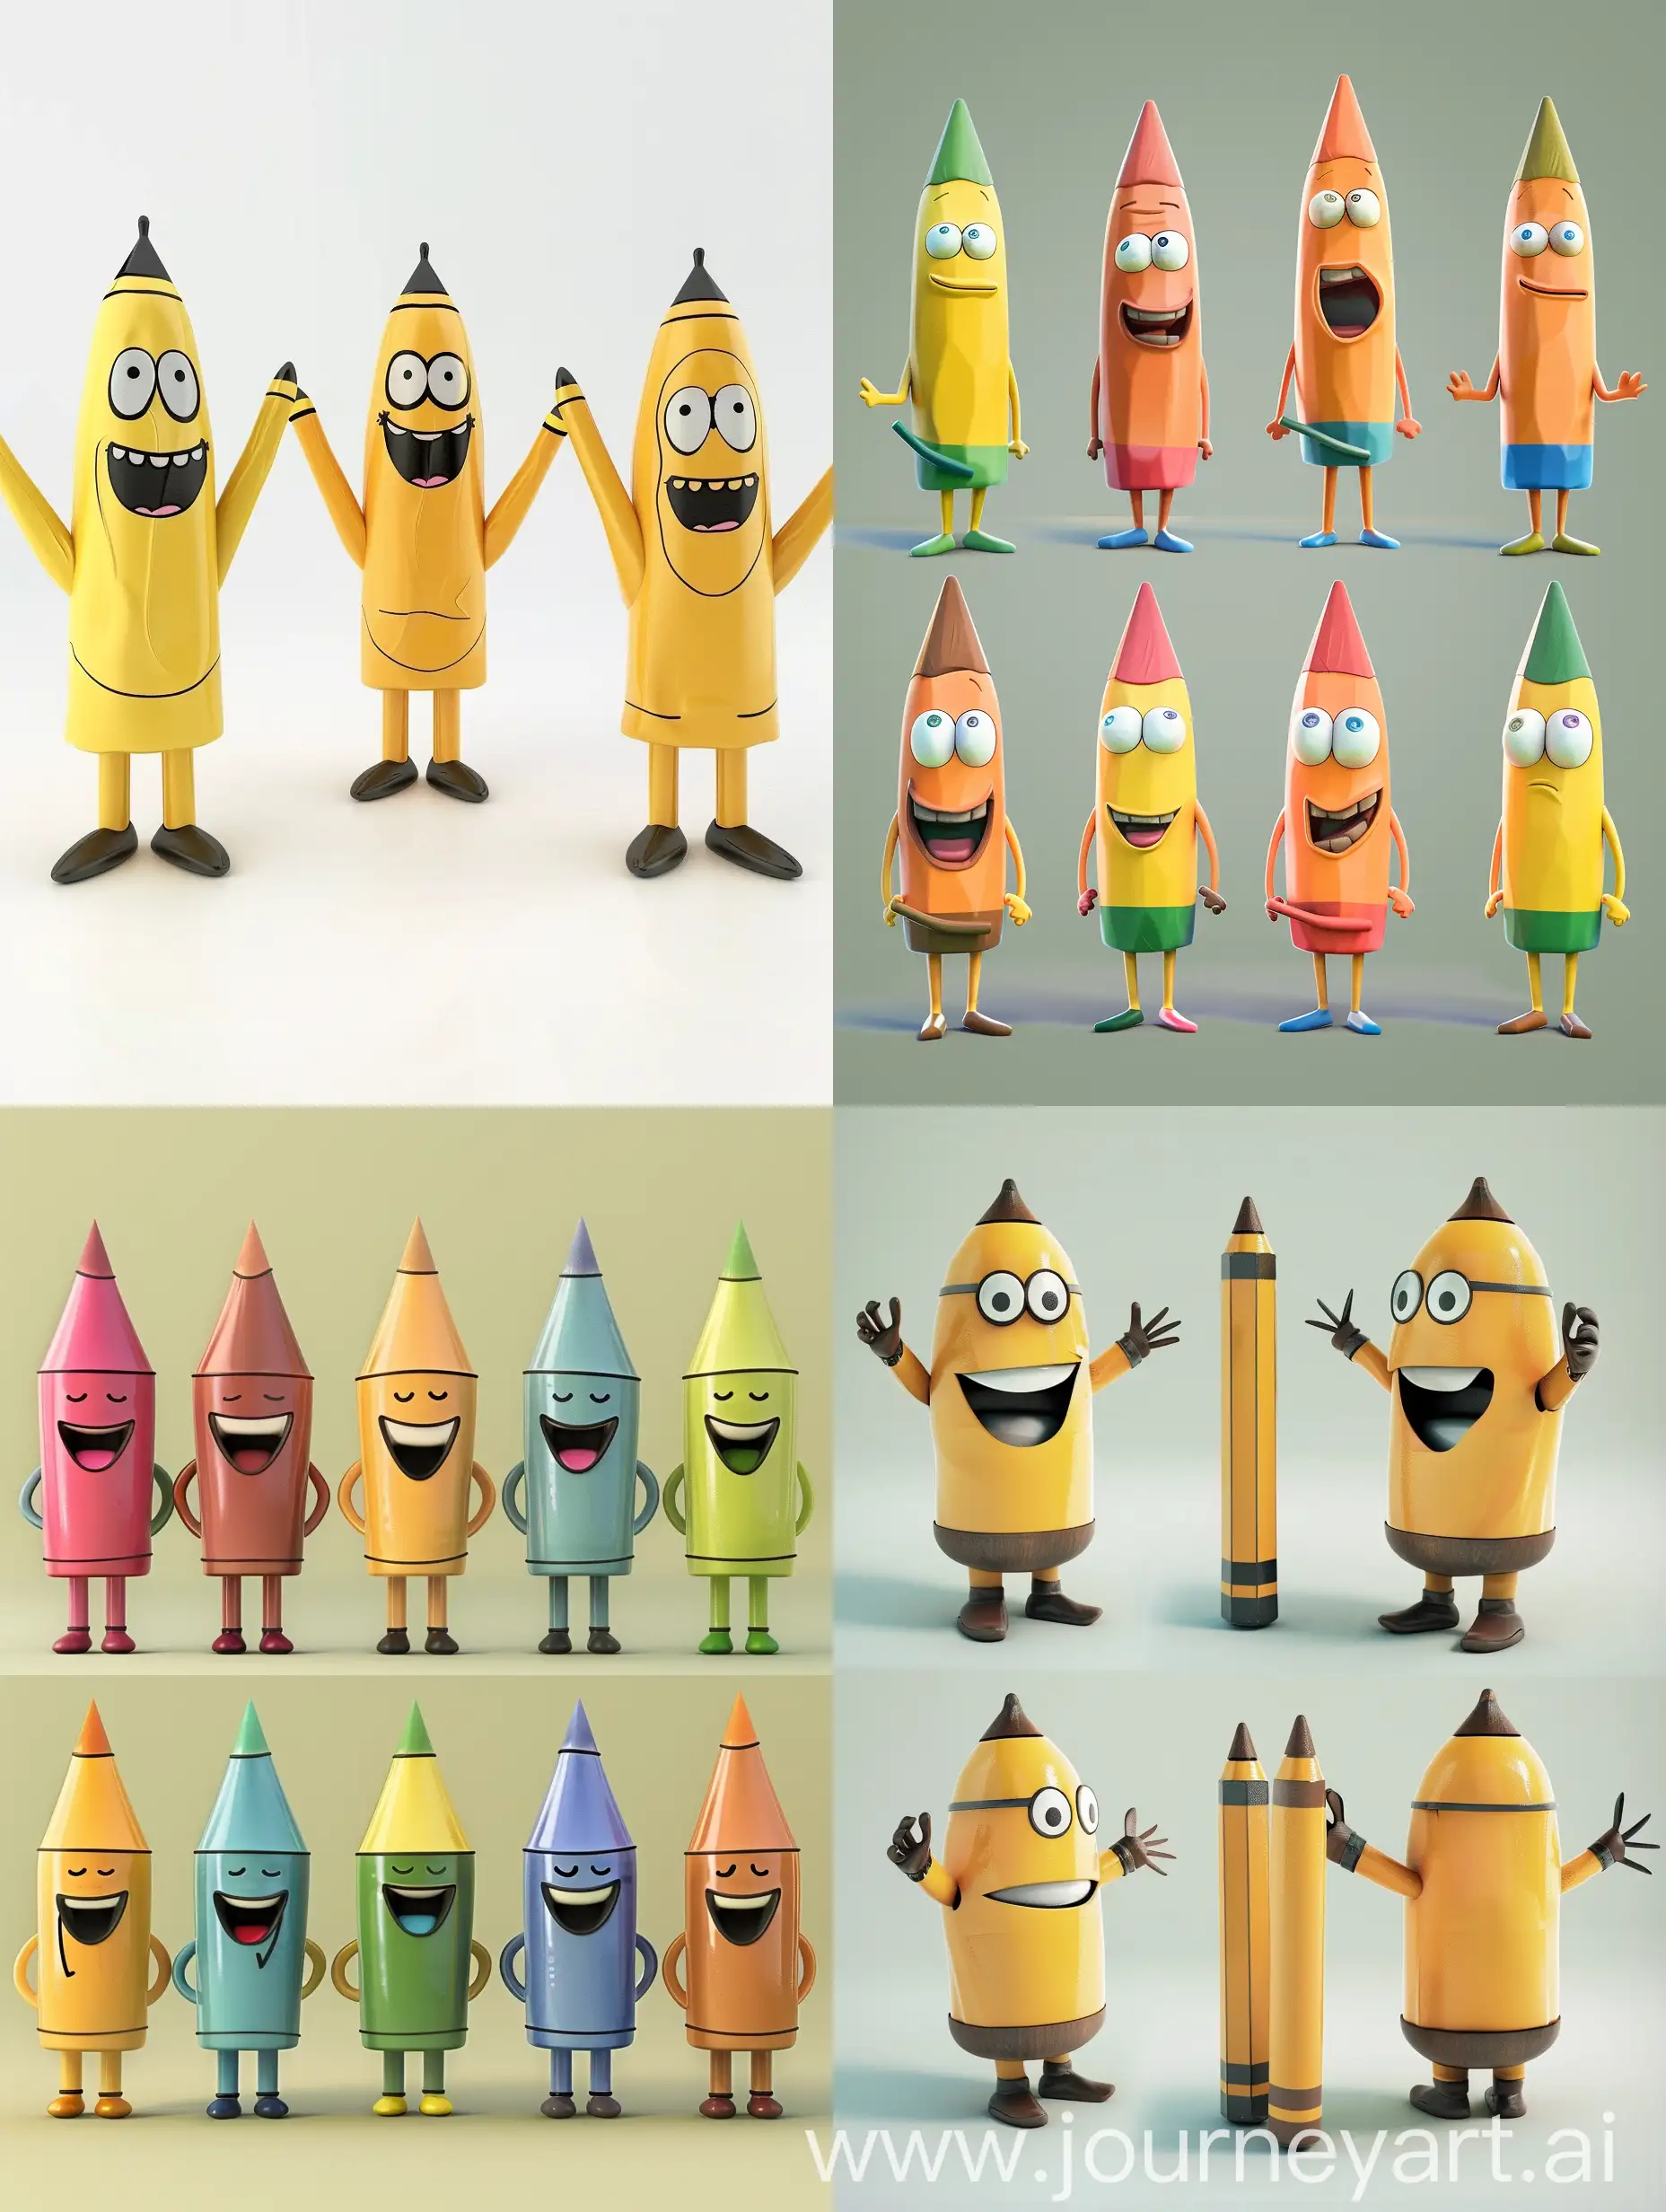 Crayon-Character-in-Playful-Poses-for-Kids-Story-Illustration